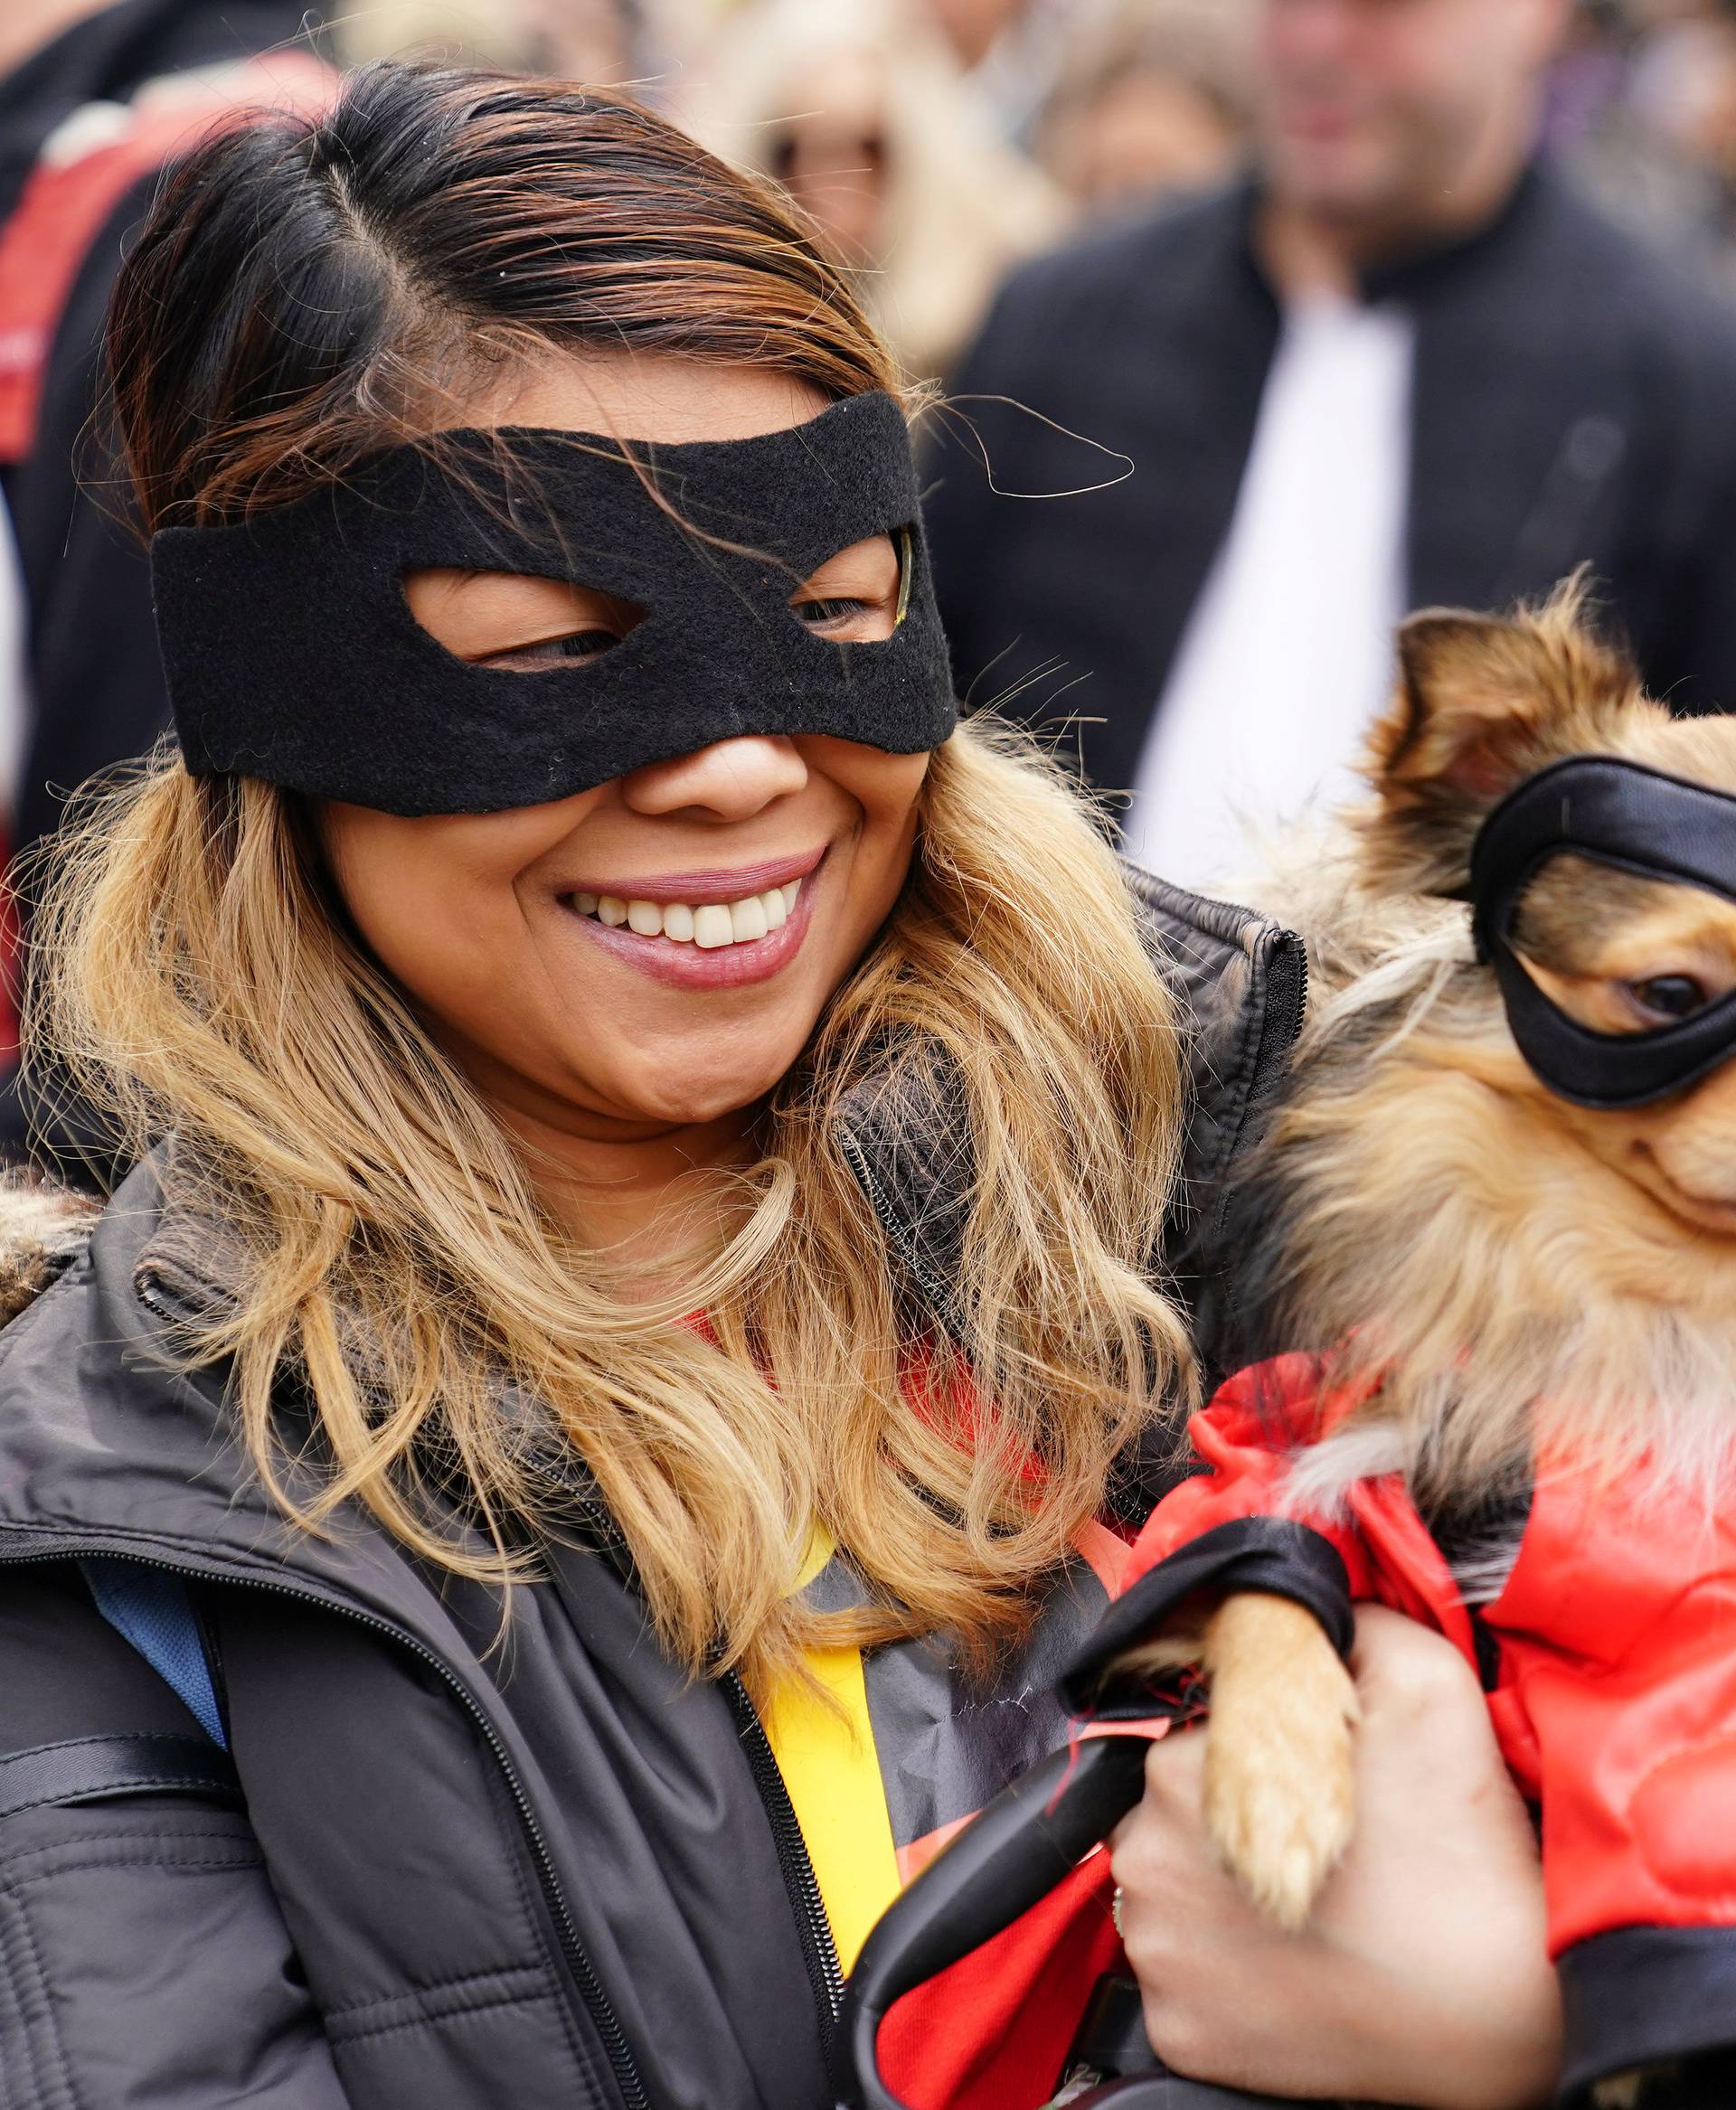 People attend the Tompkins Square Park Halloween Dog Parade at East River Park in the Manhattan borough of New York City